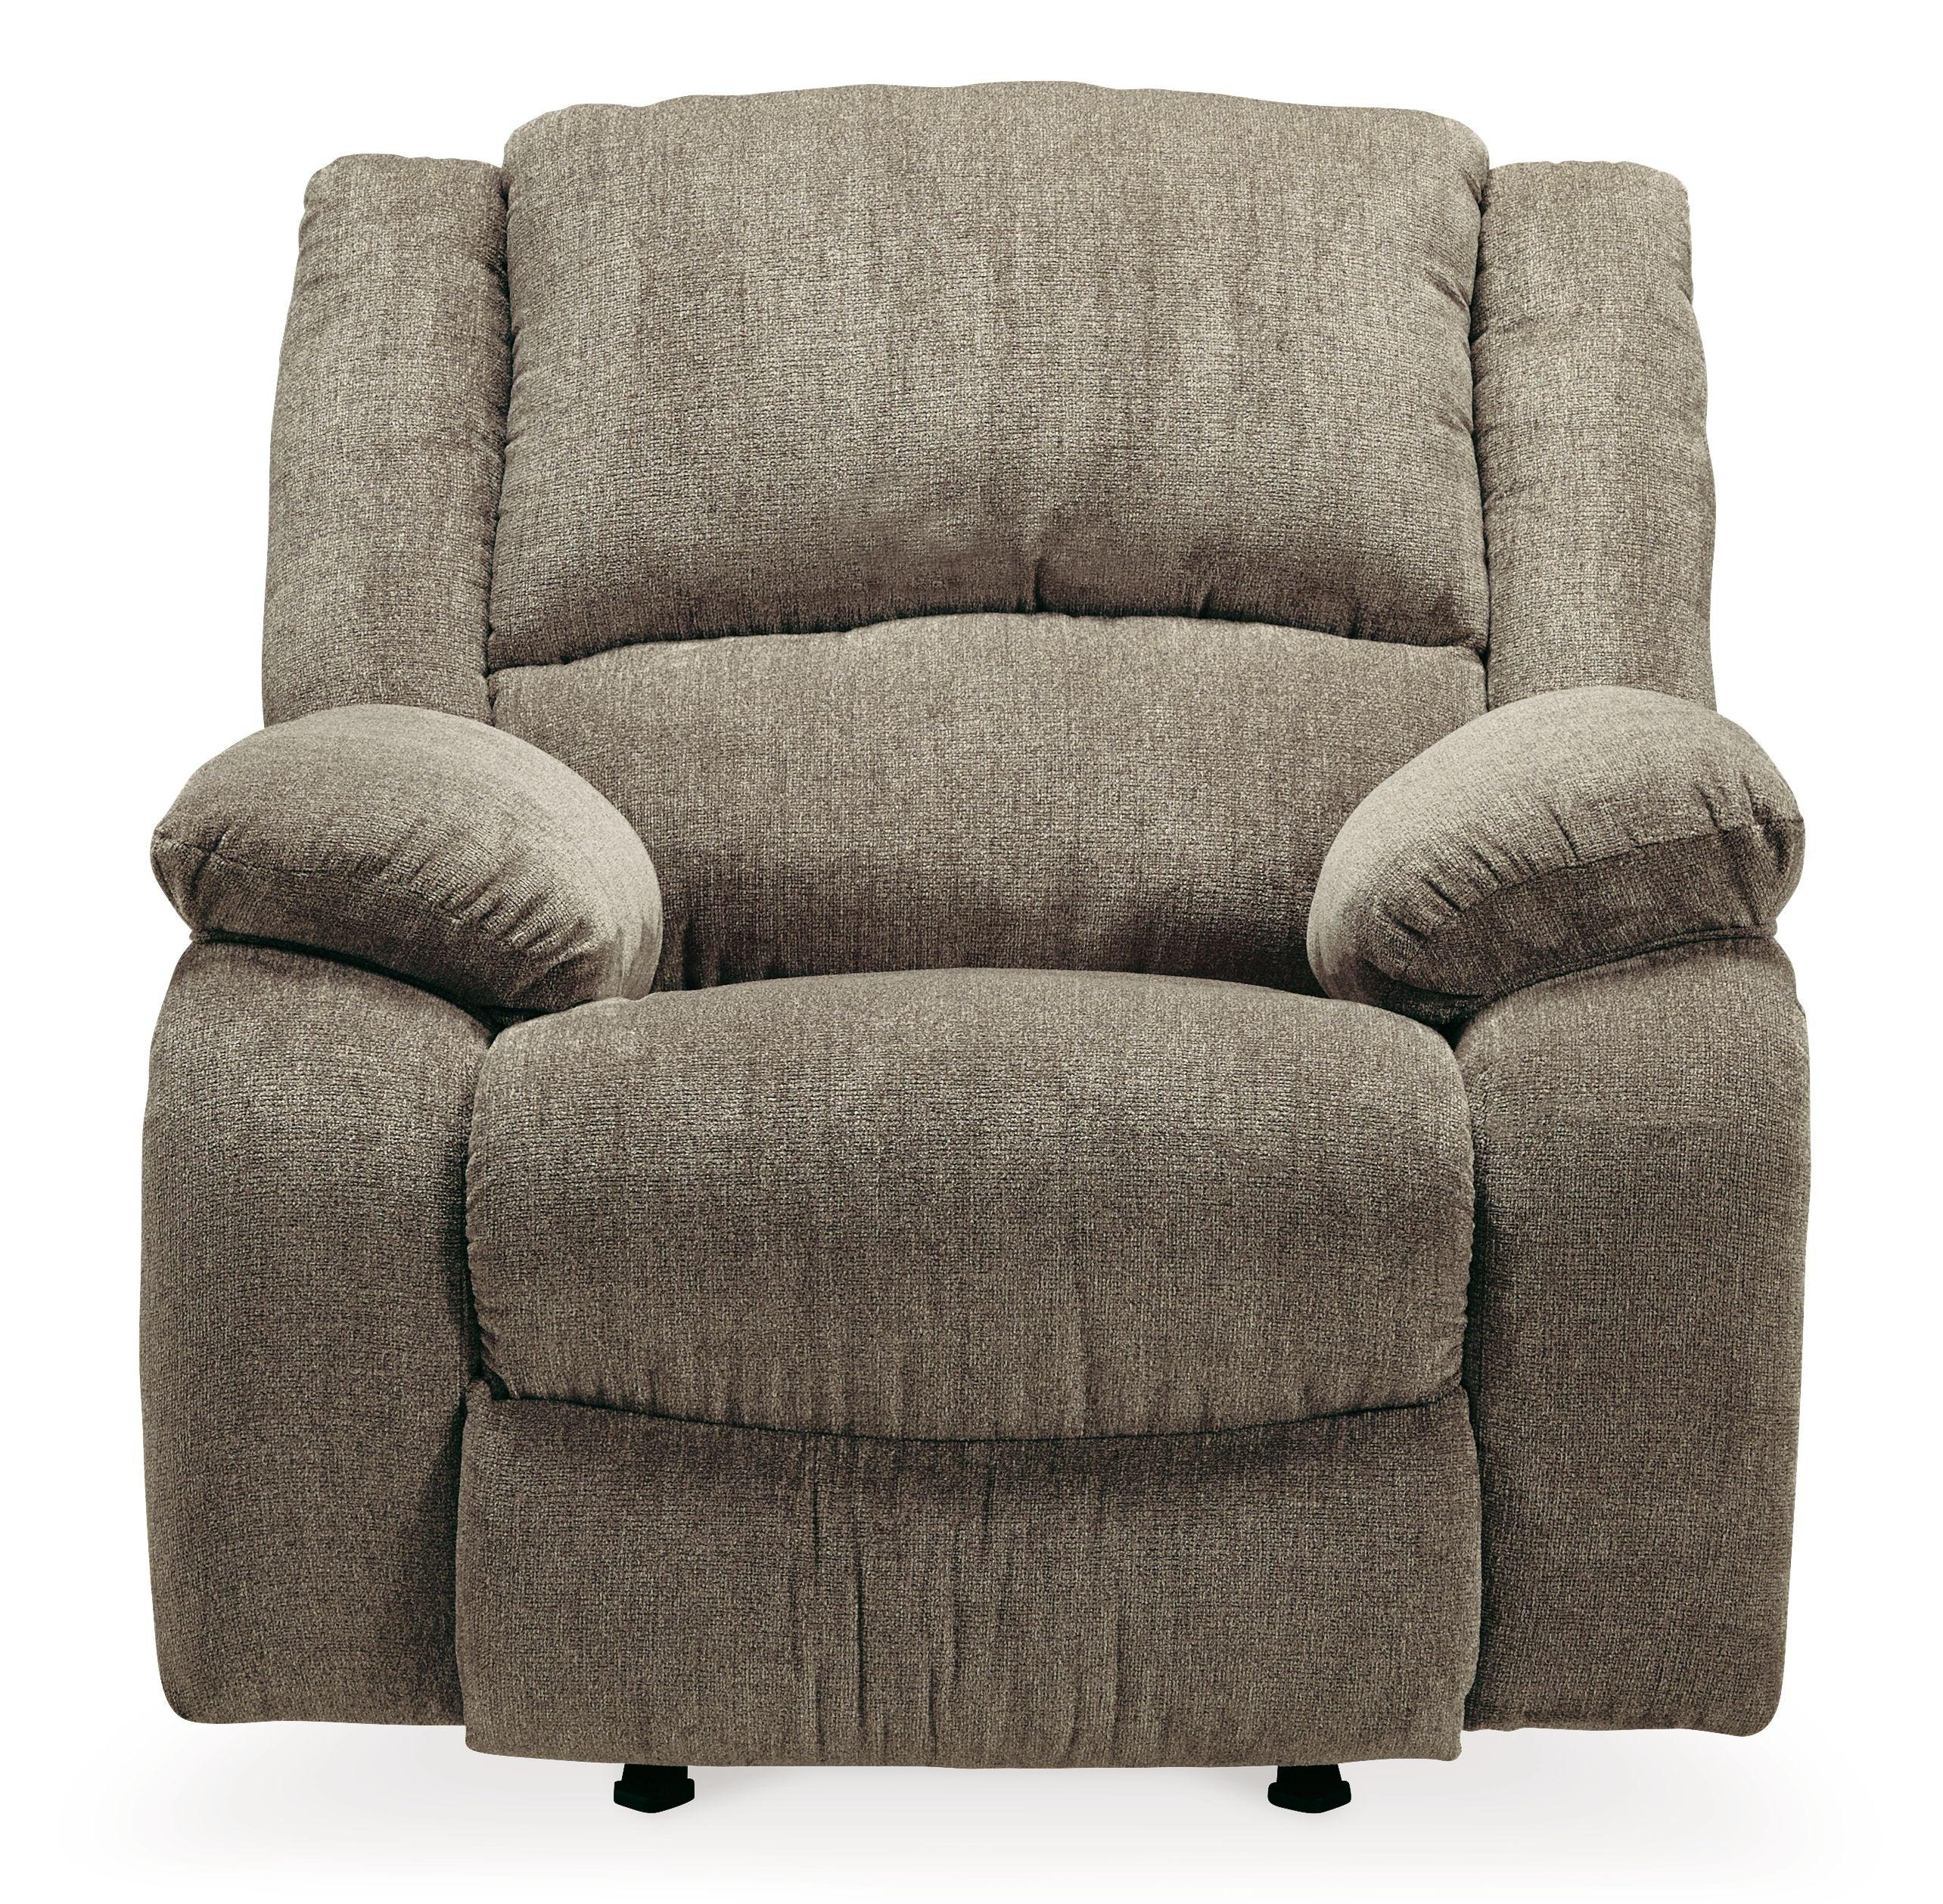 Ashley Furniture - Draycoll - Pewter - Power Rocker Recliner - 5th Avenue Furniture